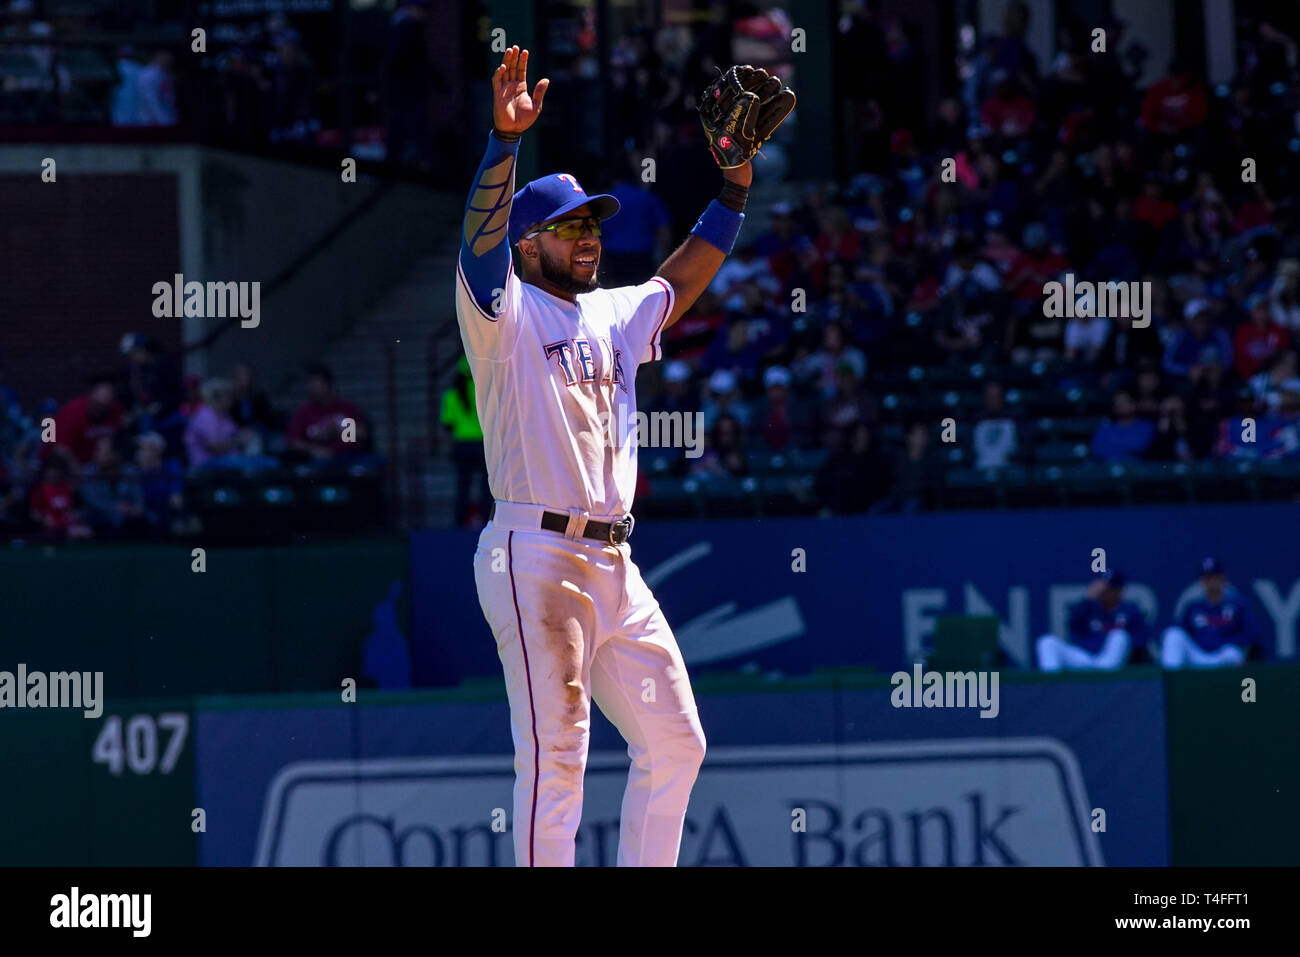 Elvis Andrus acknowledges the fans during Texas Rangers vs. Oakland A's Stock Photo